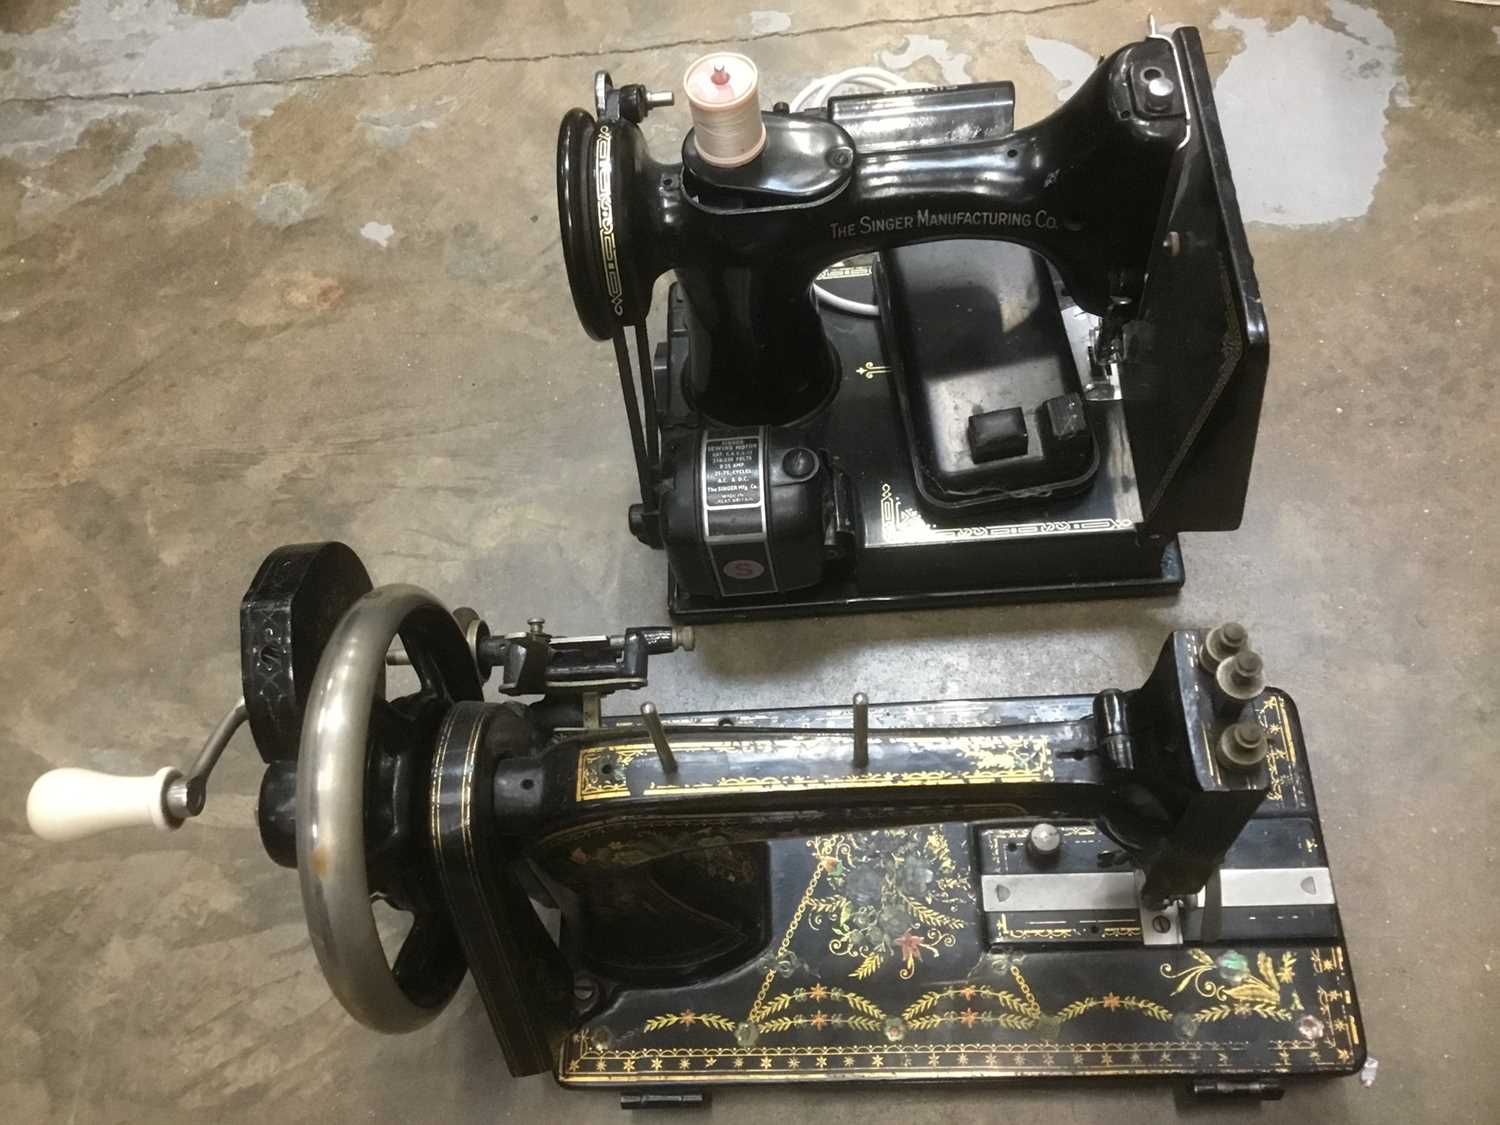 Two antique sewing machines.